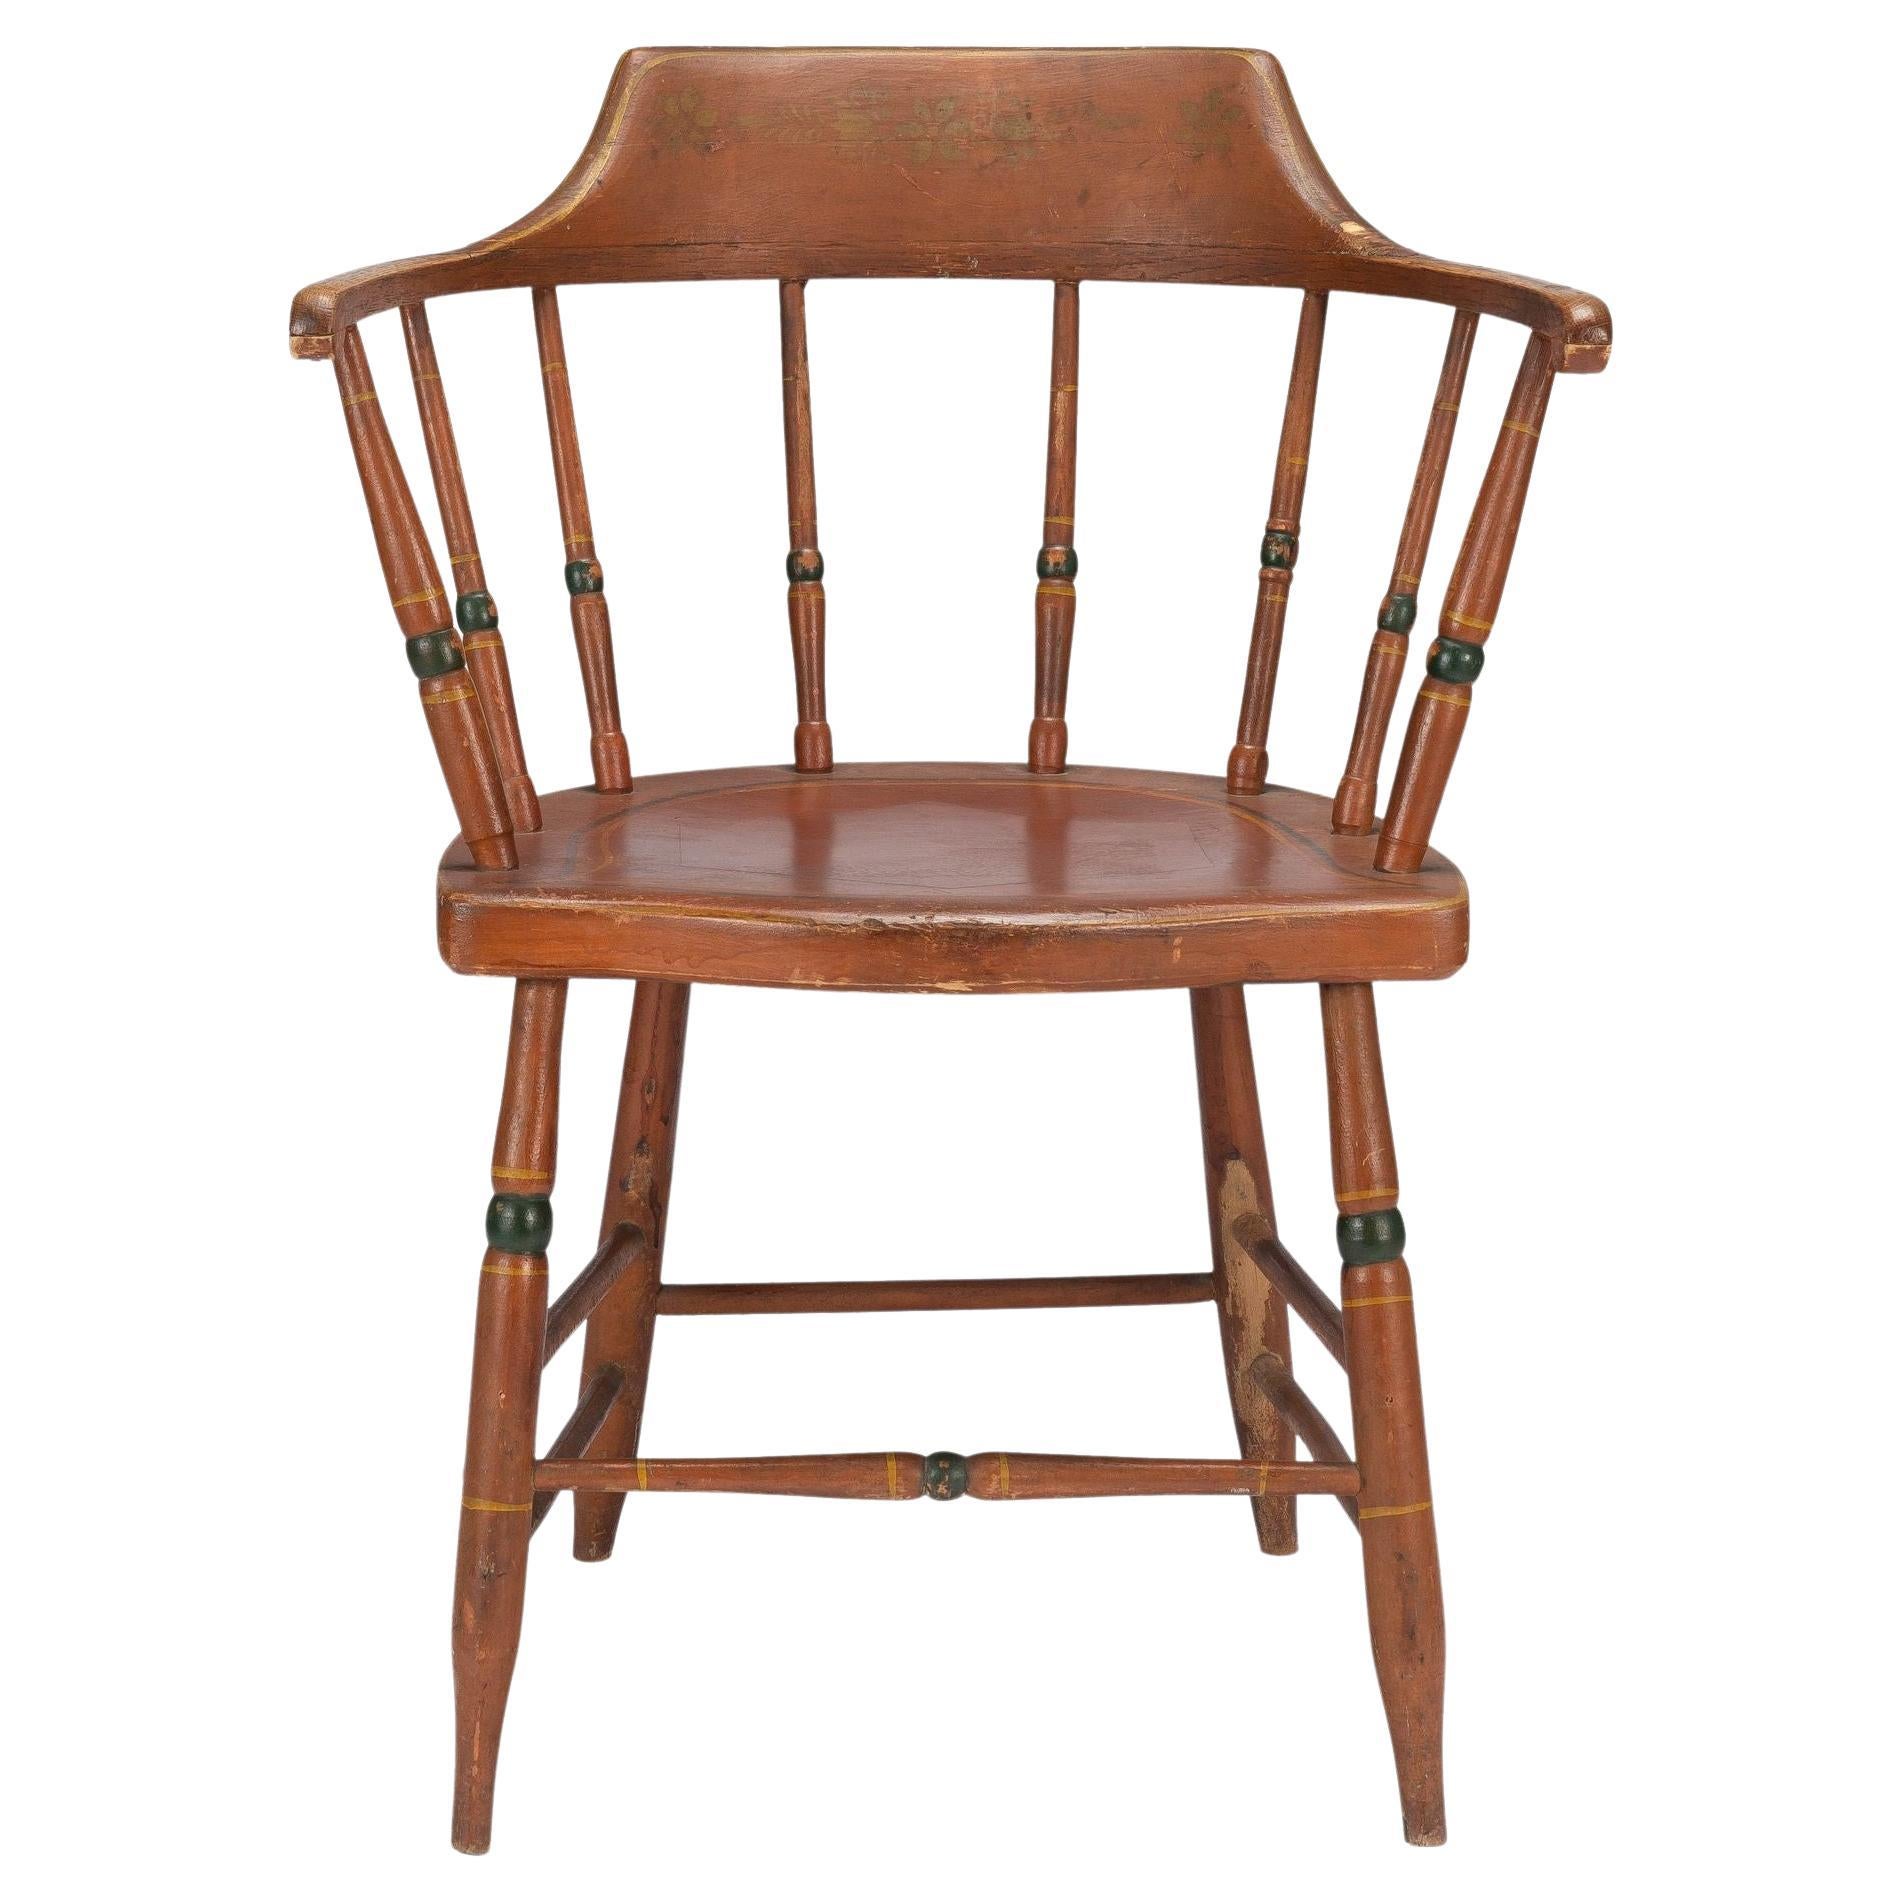 American Painted Windsor Captain's Chair '1820'